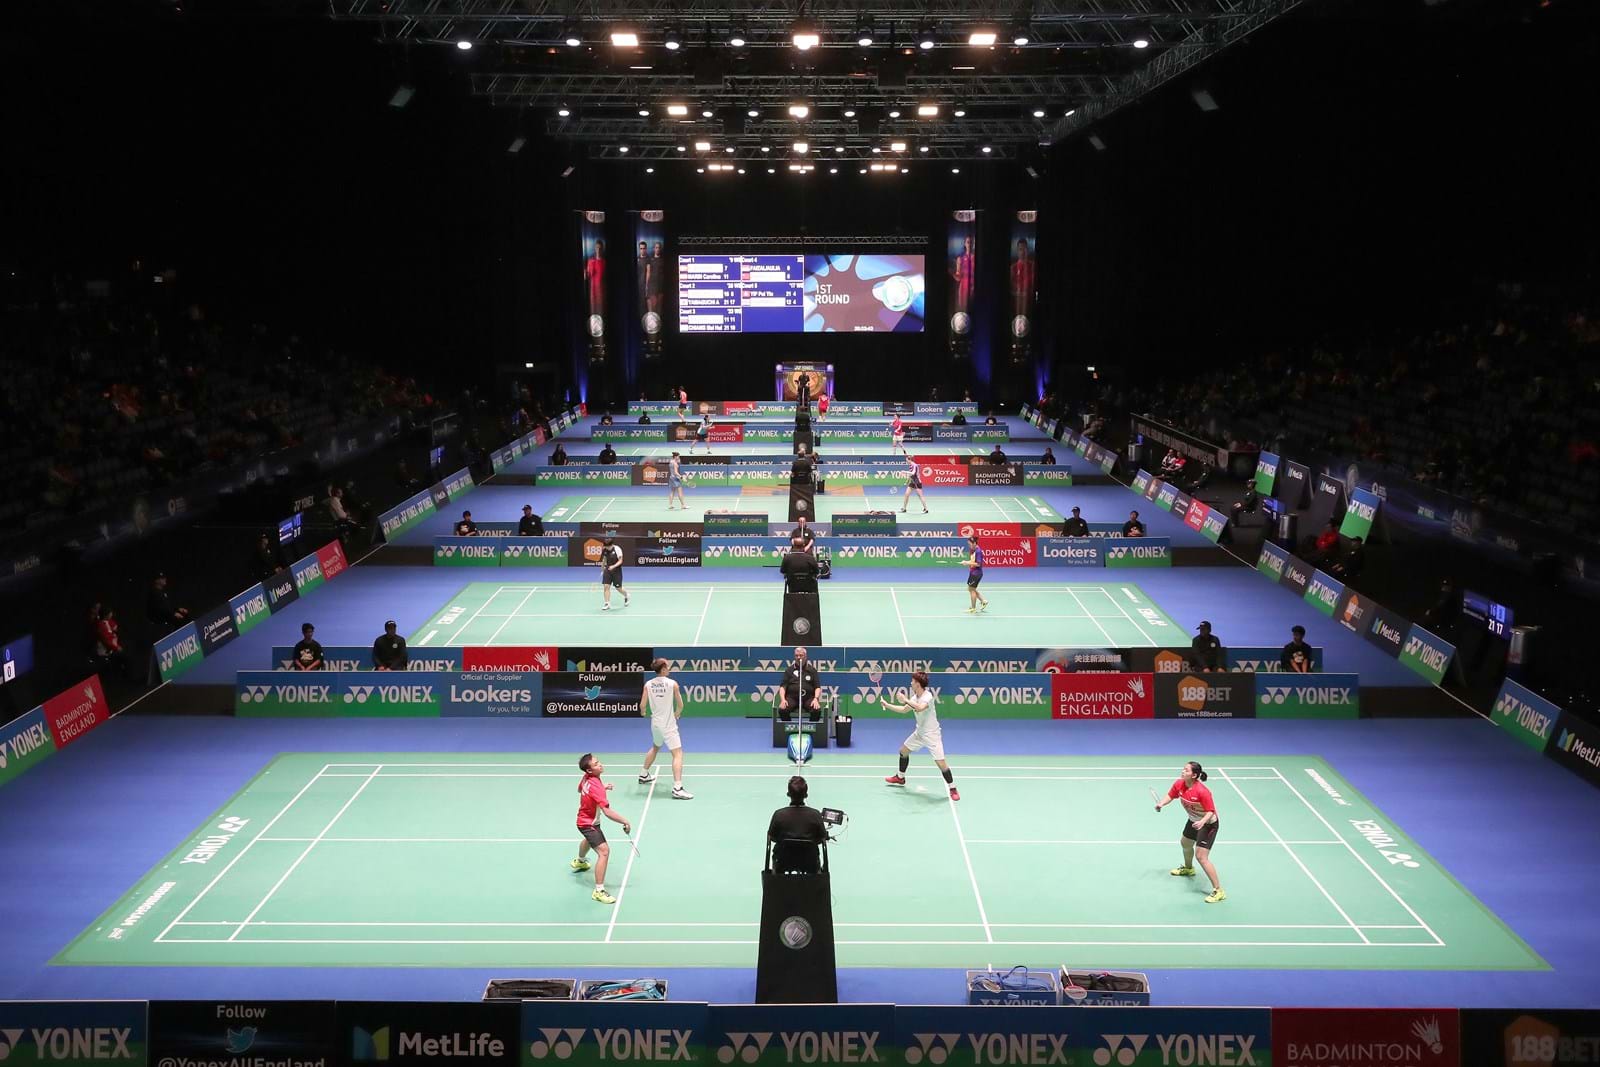 SUNSET+VINE SMASHES FOUR YEAR DEAL WITH BADMINTON ENGLAND